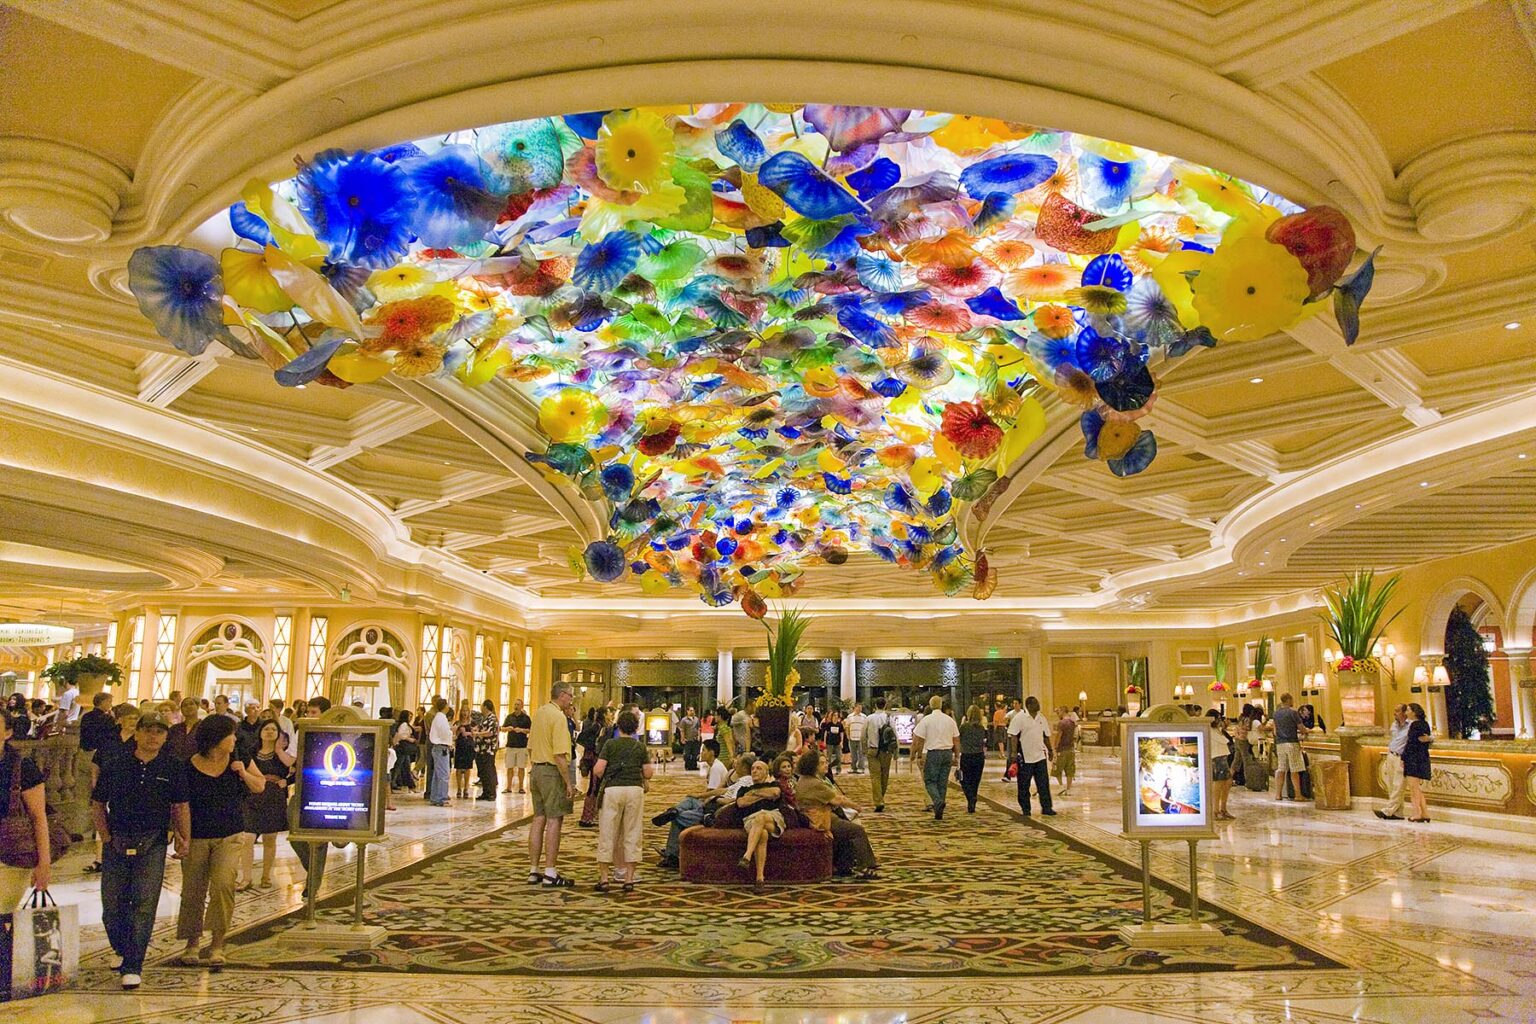 Glass flowers created by the artists DALE CHIHULY is installed in the ceiling of the BELLAGIO HOTEL AND CASINO - LAS VEGAS, NEVADA